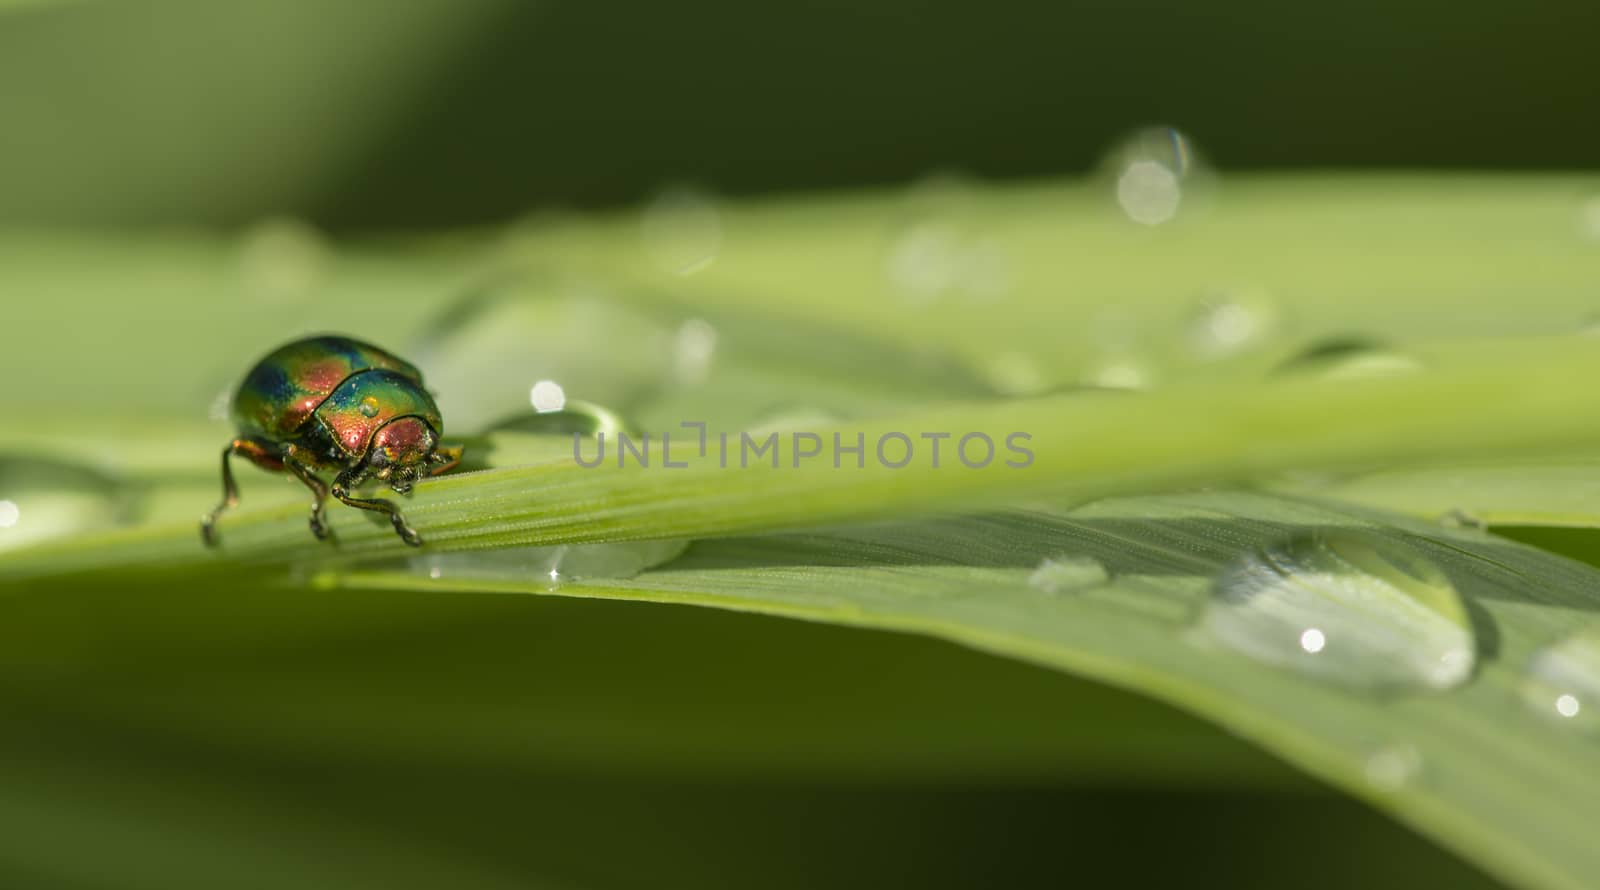 Jewel bug on blades of grass with dew drops. by AlessandroZocc